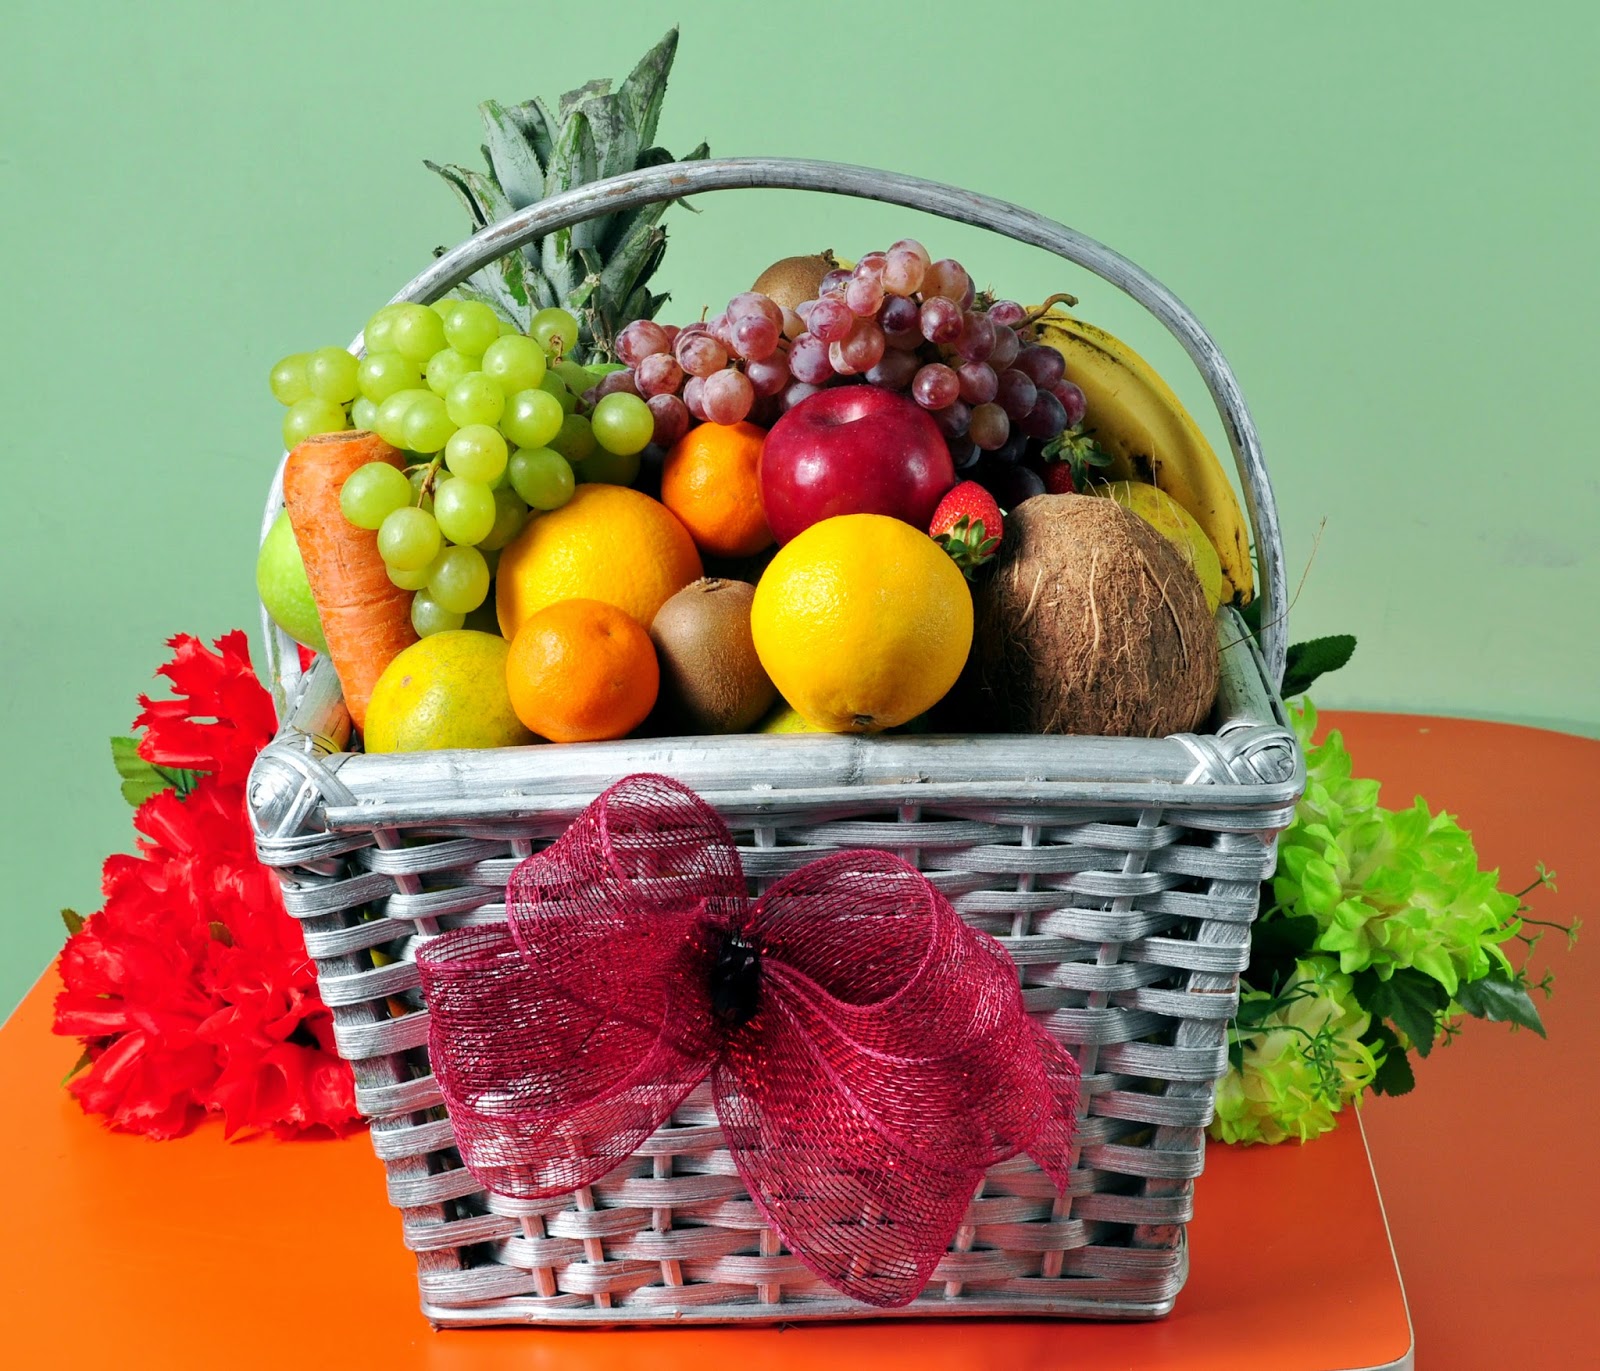 GET THESE YUMMY FRUIT BASKETS & GIFT HAMPERS FOR CHRISTMAS FROM SO